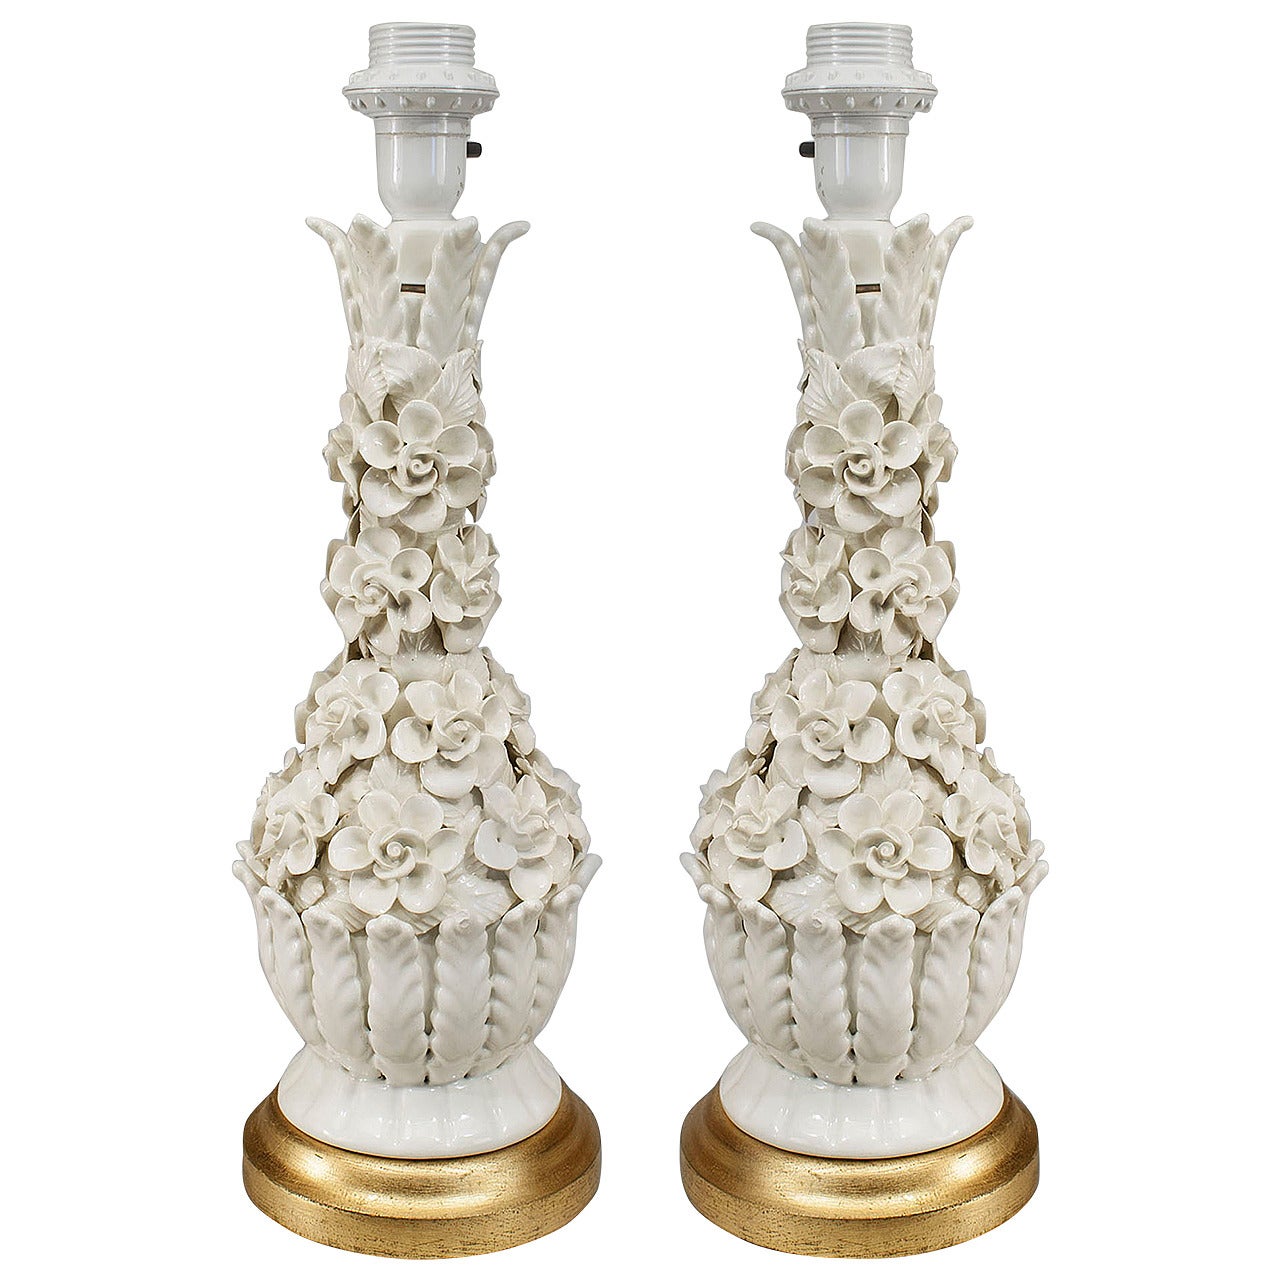 Pair of 1940s French Floral Porcelain Lamps